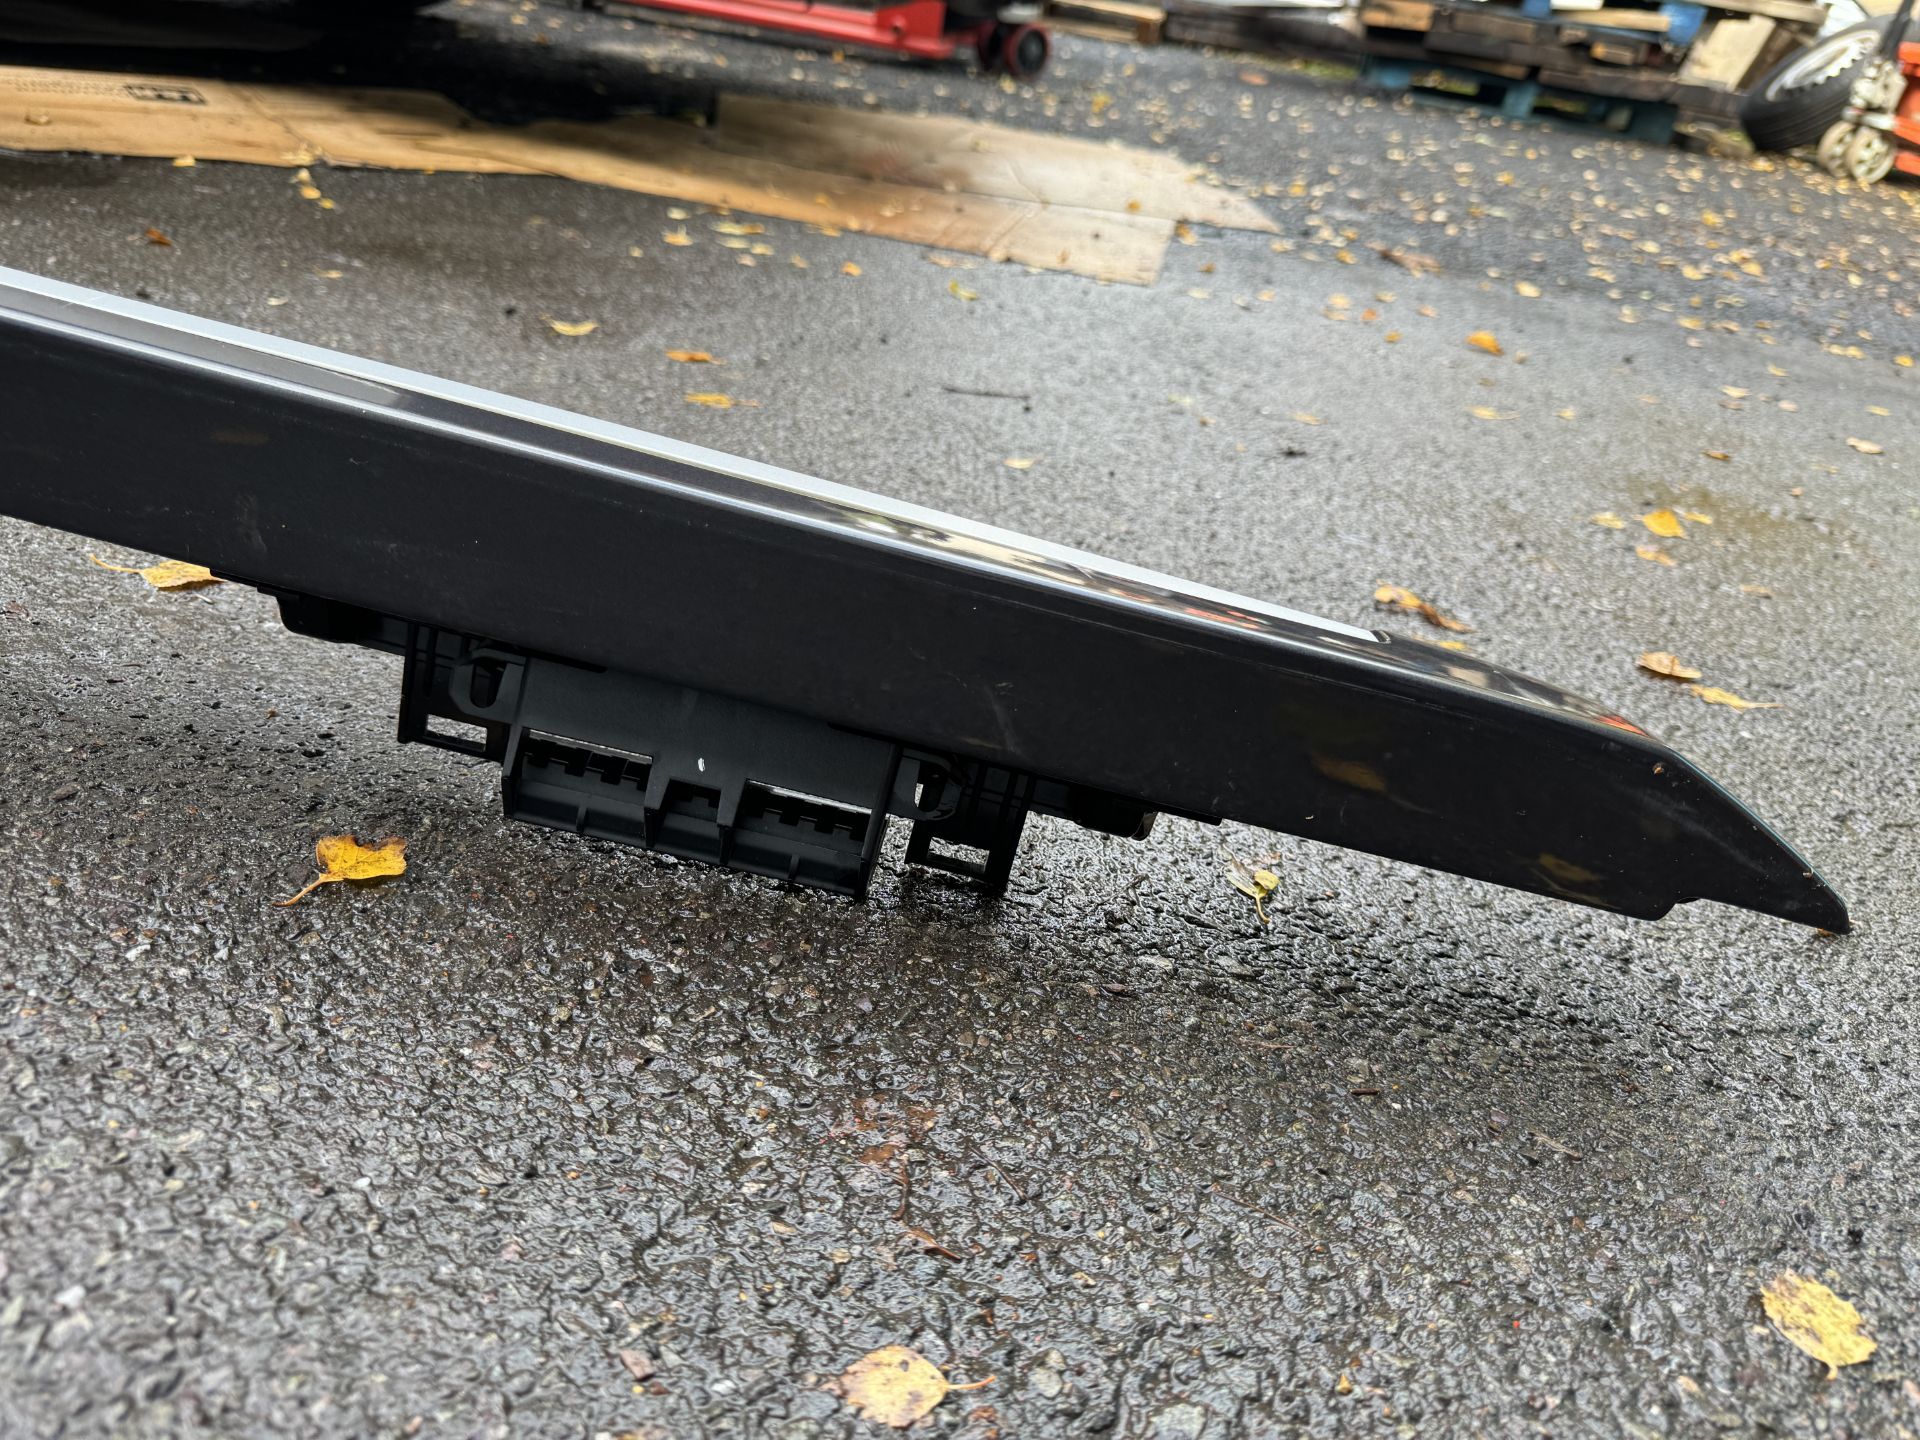 Genuine Ford Ranger Black Roller Tonneau Cover with Parts & Fixings as Shown - Further Details to be - Image 32 of 43